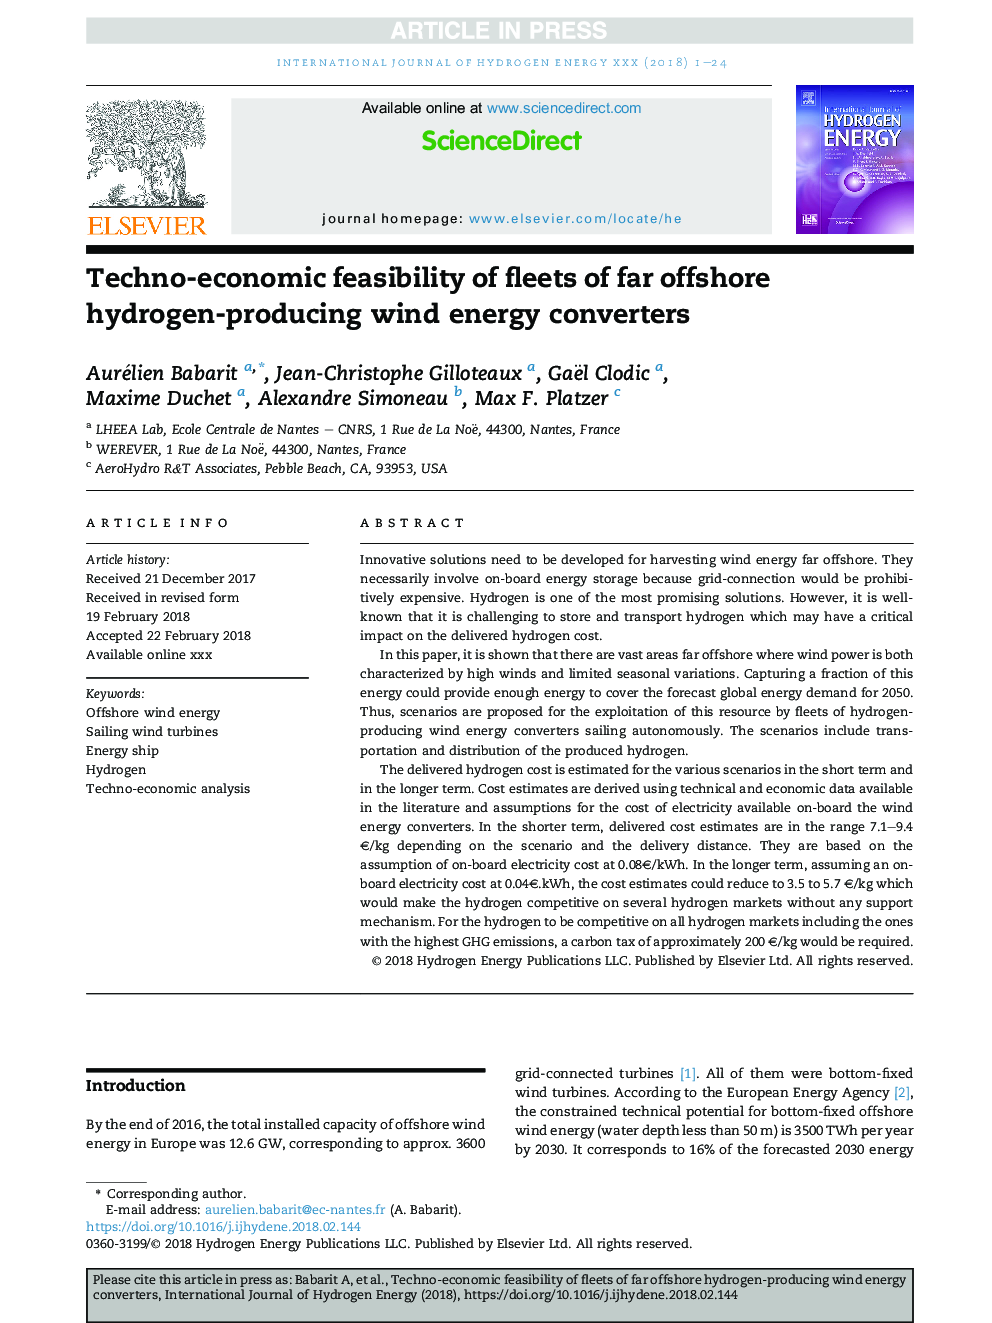 Techno-economic feasibility of fleets of far offshore hydrogen-producing wind energy converters